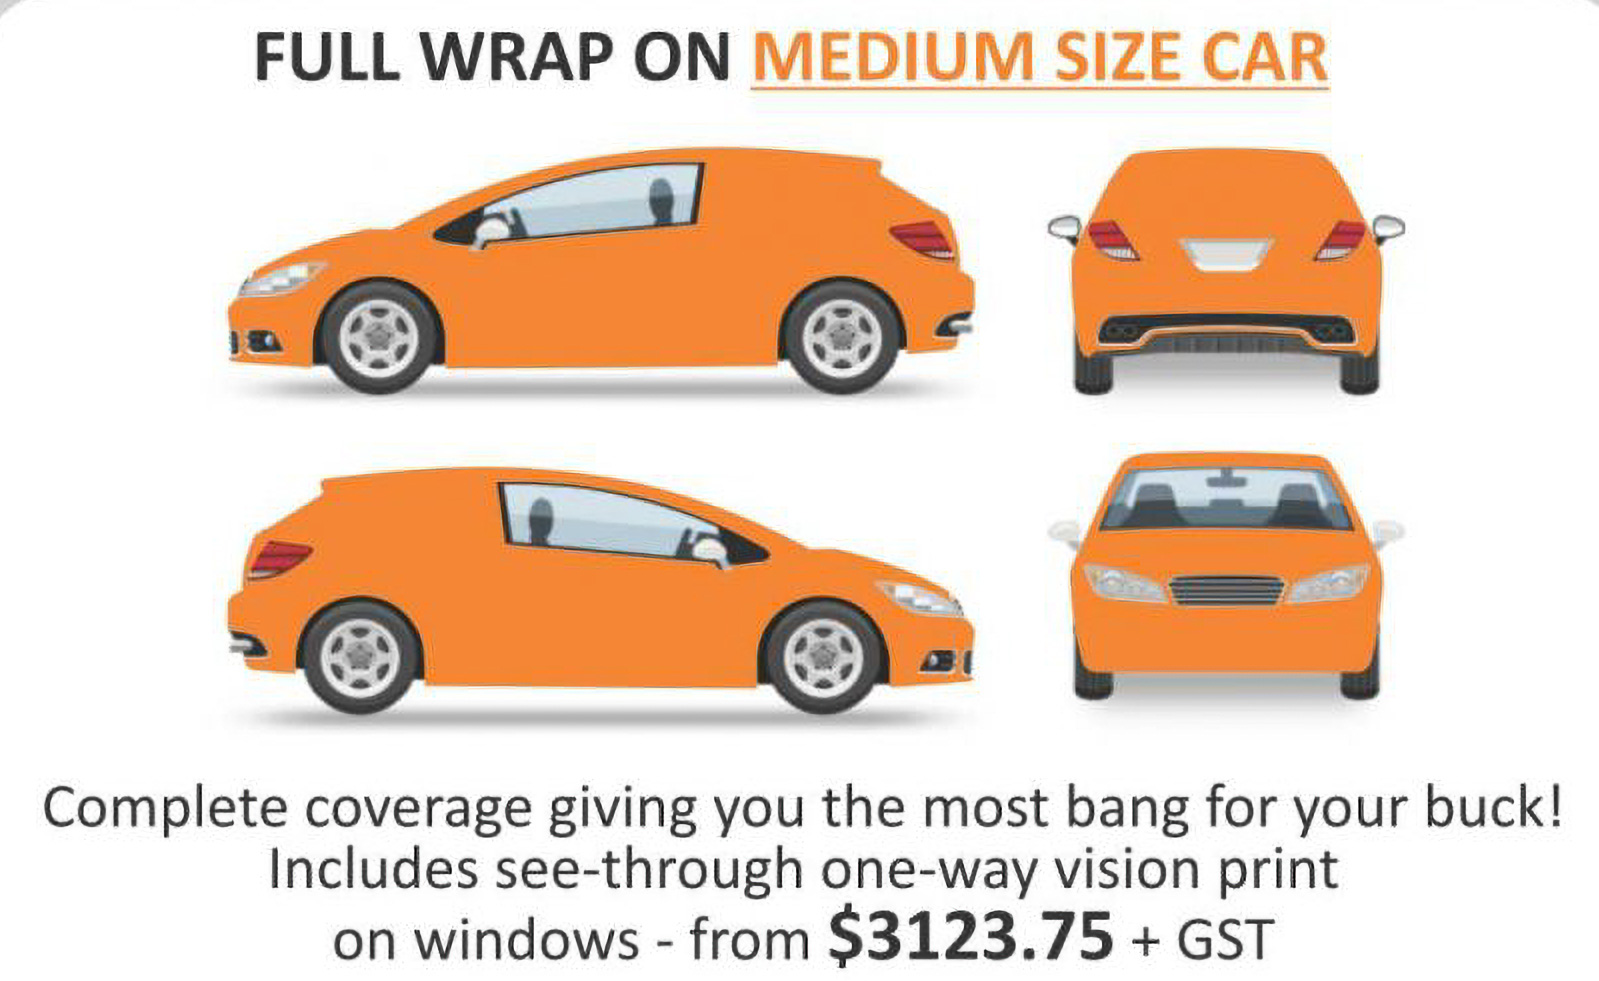 Full wrap vehicle signage pricing for medium car in Newcastle